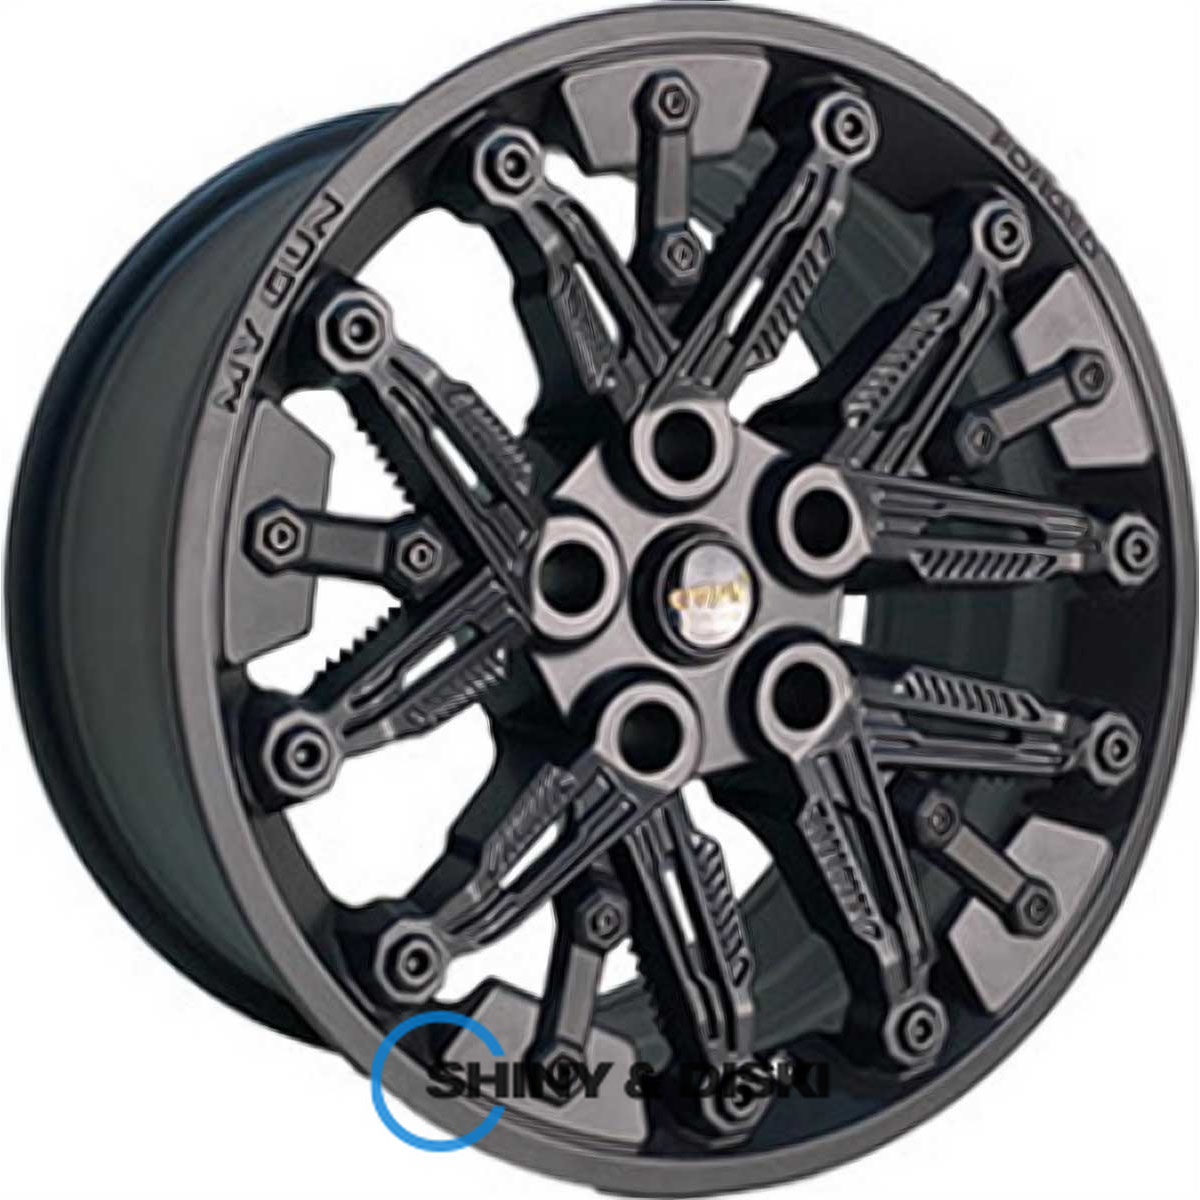 off road wheels ow1908-5 mb